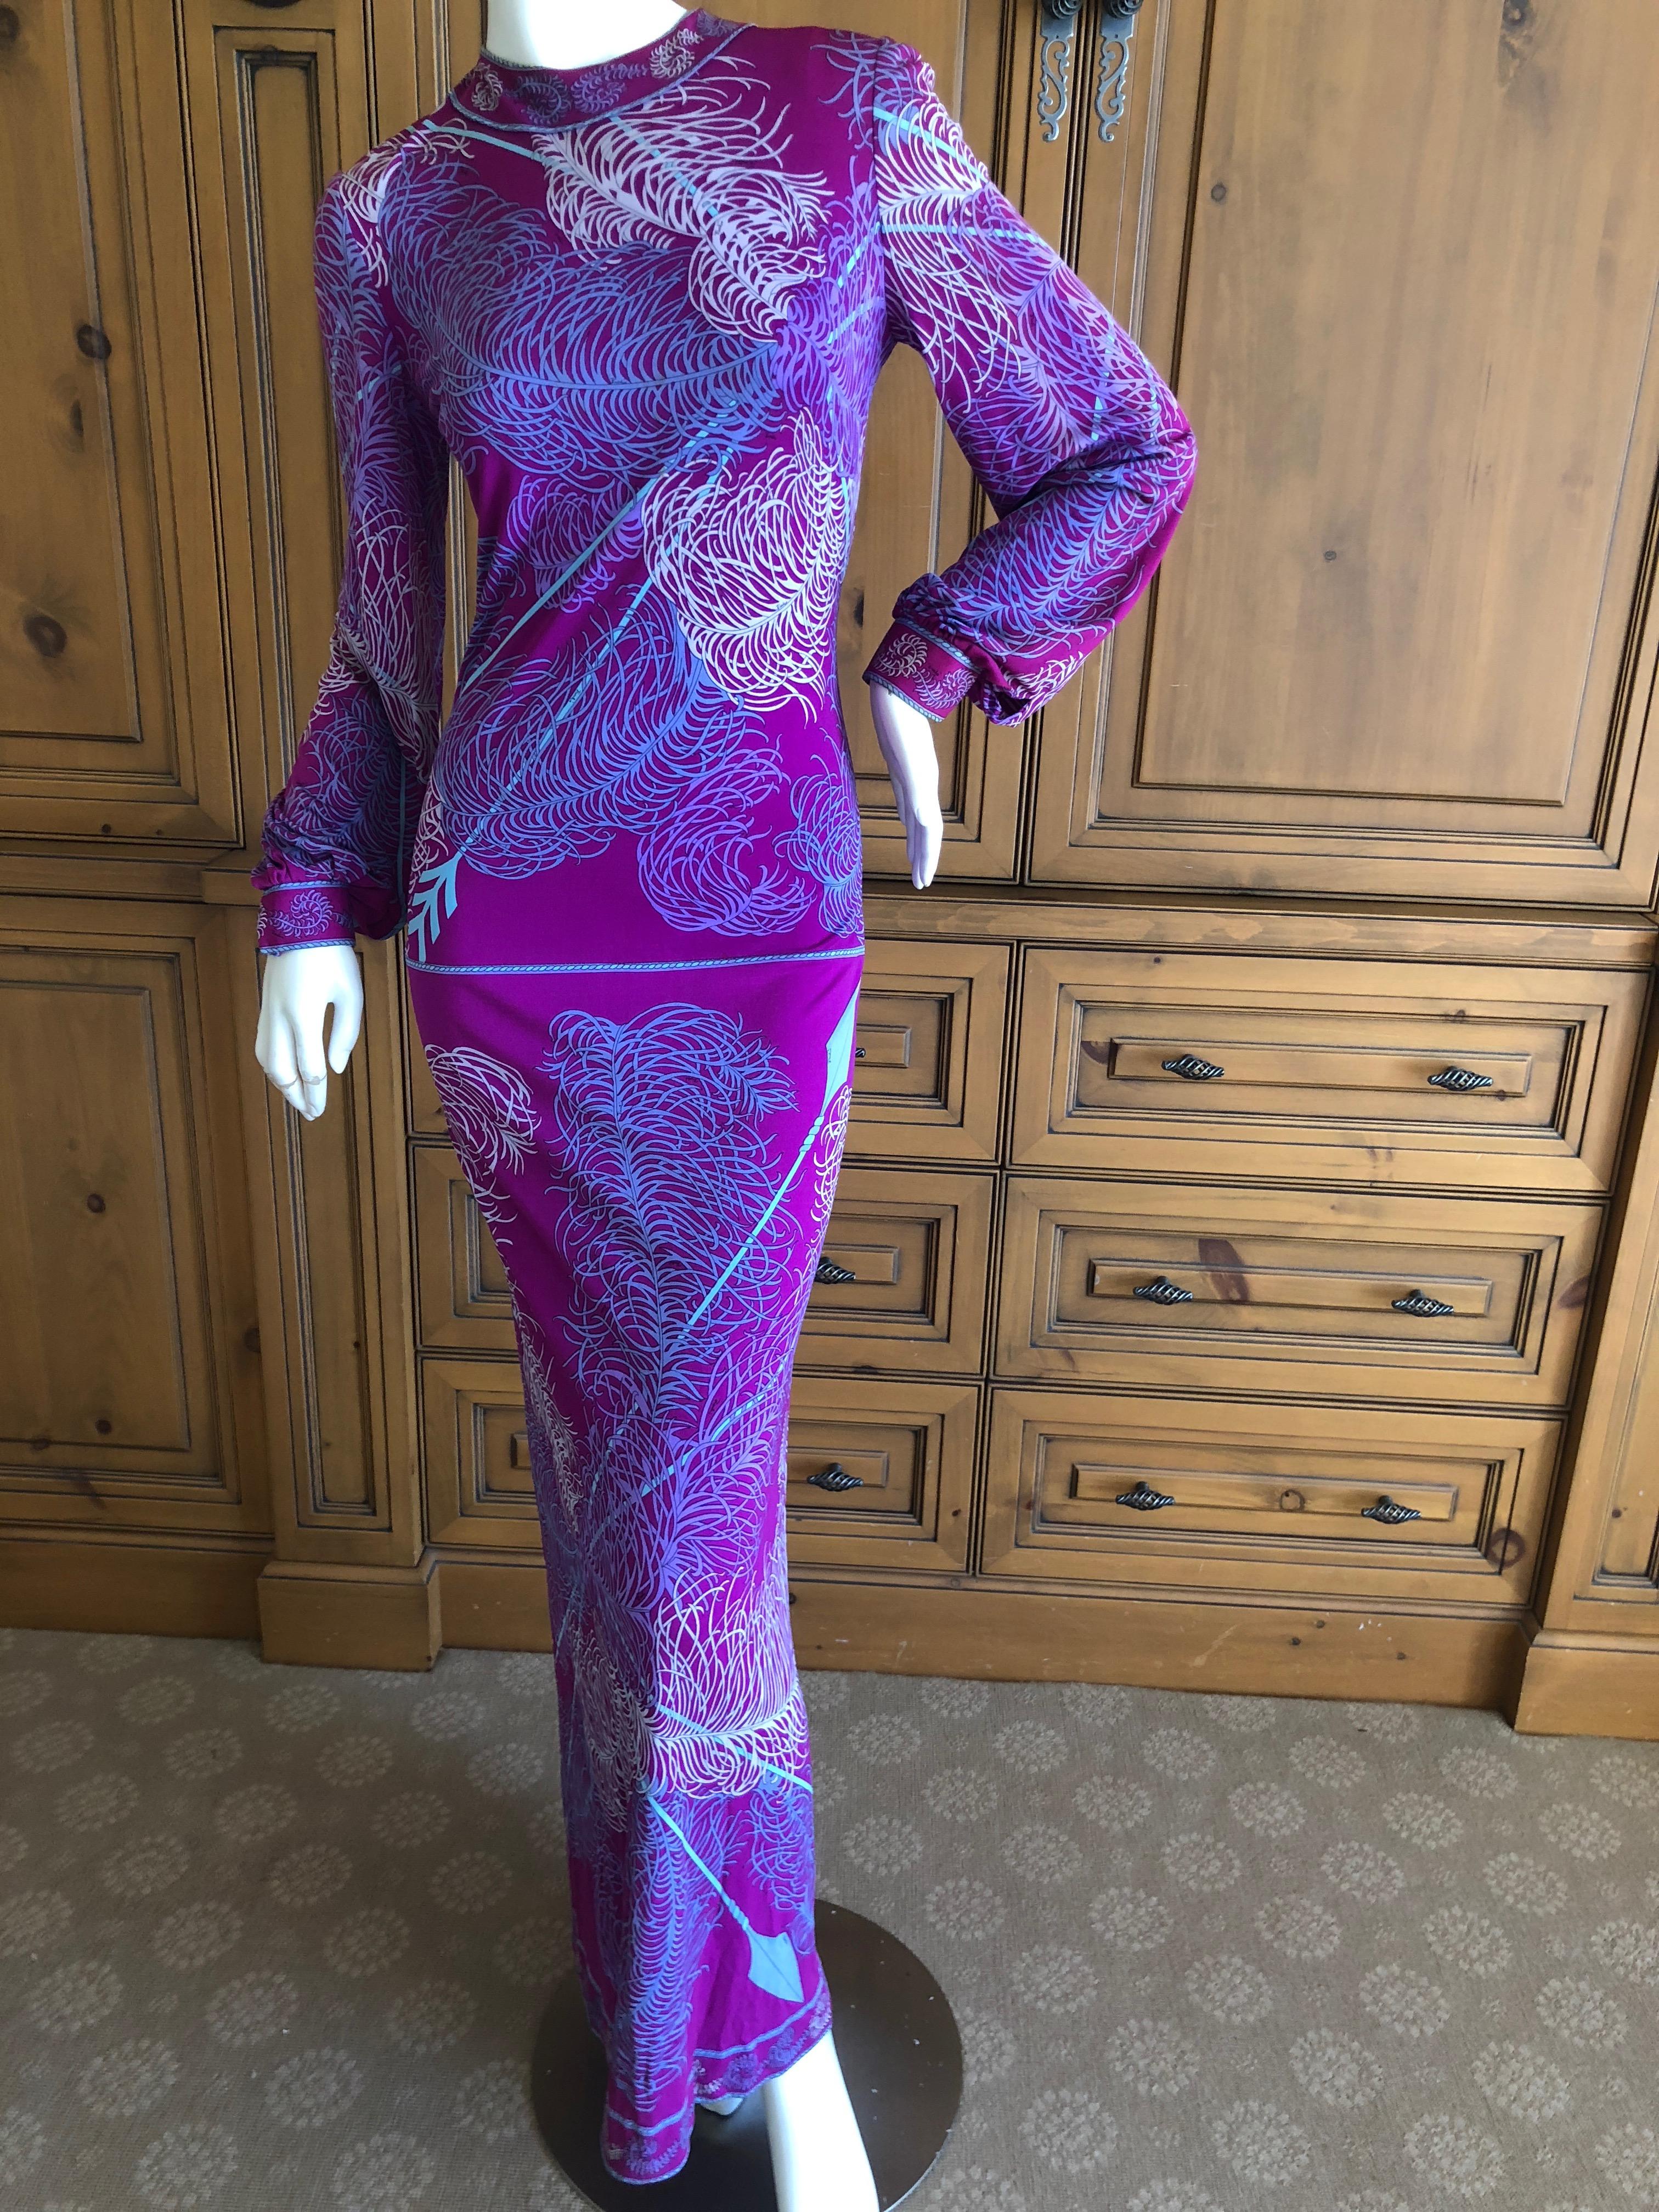 Emilio Pucci Rare Vintage 1960's Silk Jersey Evening Dress for Saks Fifth Avenue.
Feather and spear motif, from the 60's but in excellent condition.
Size 8
Bust 34